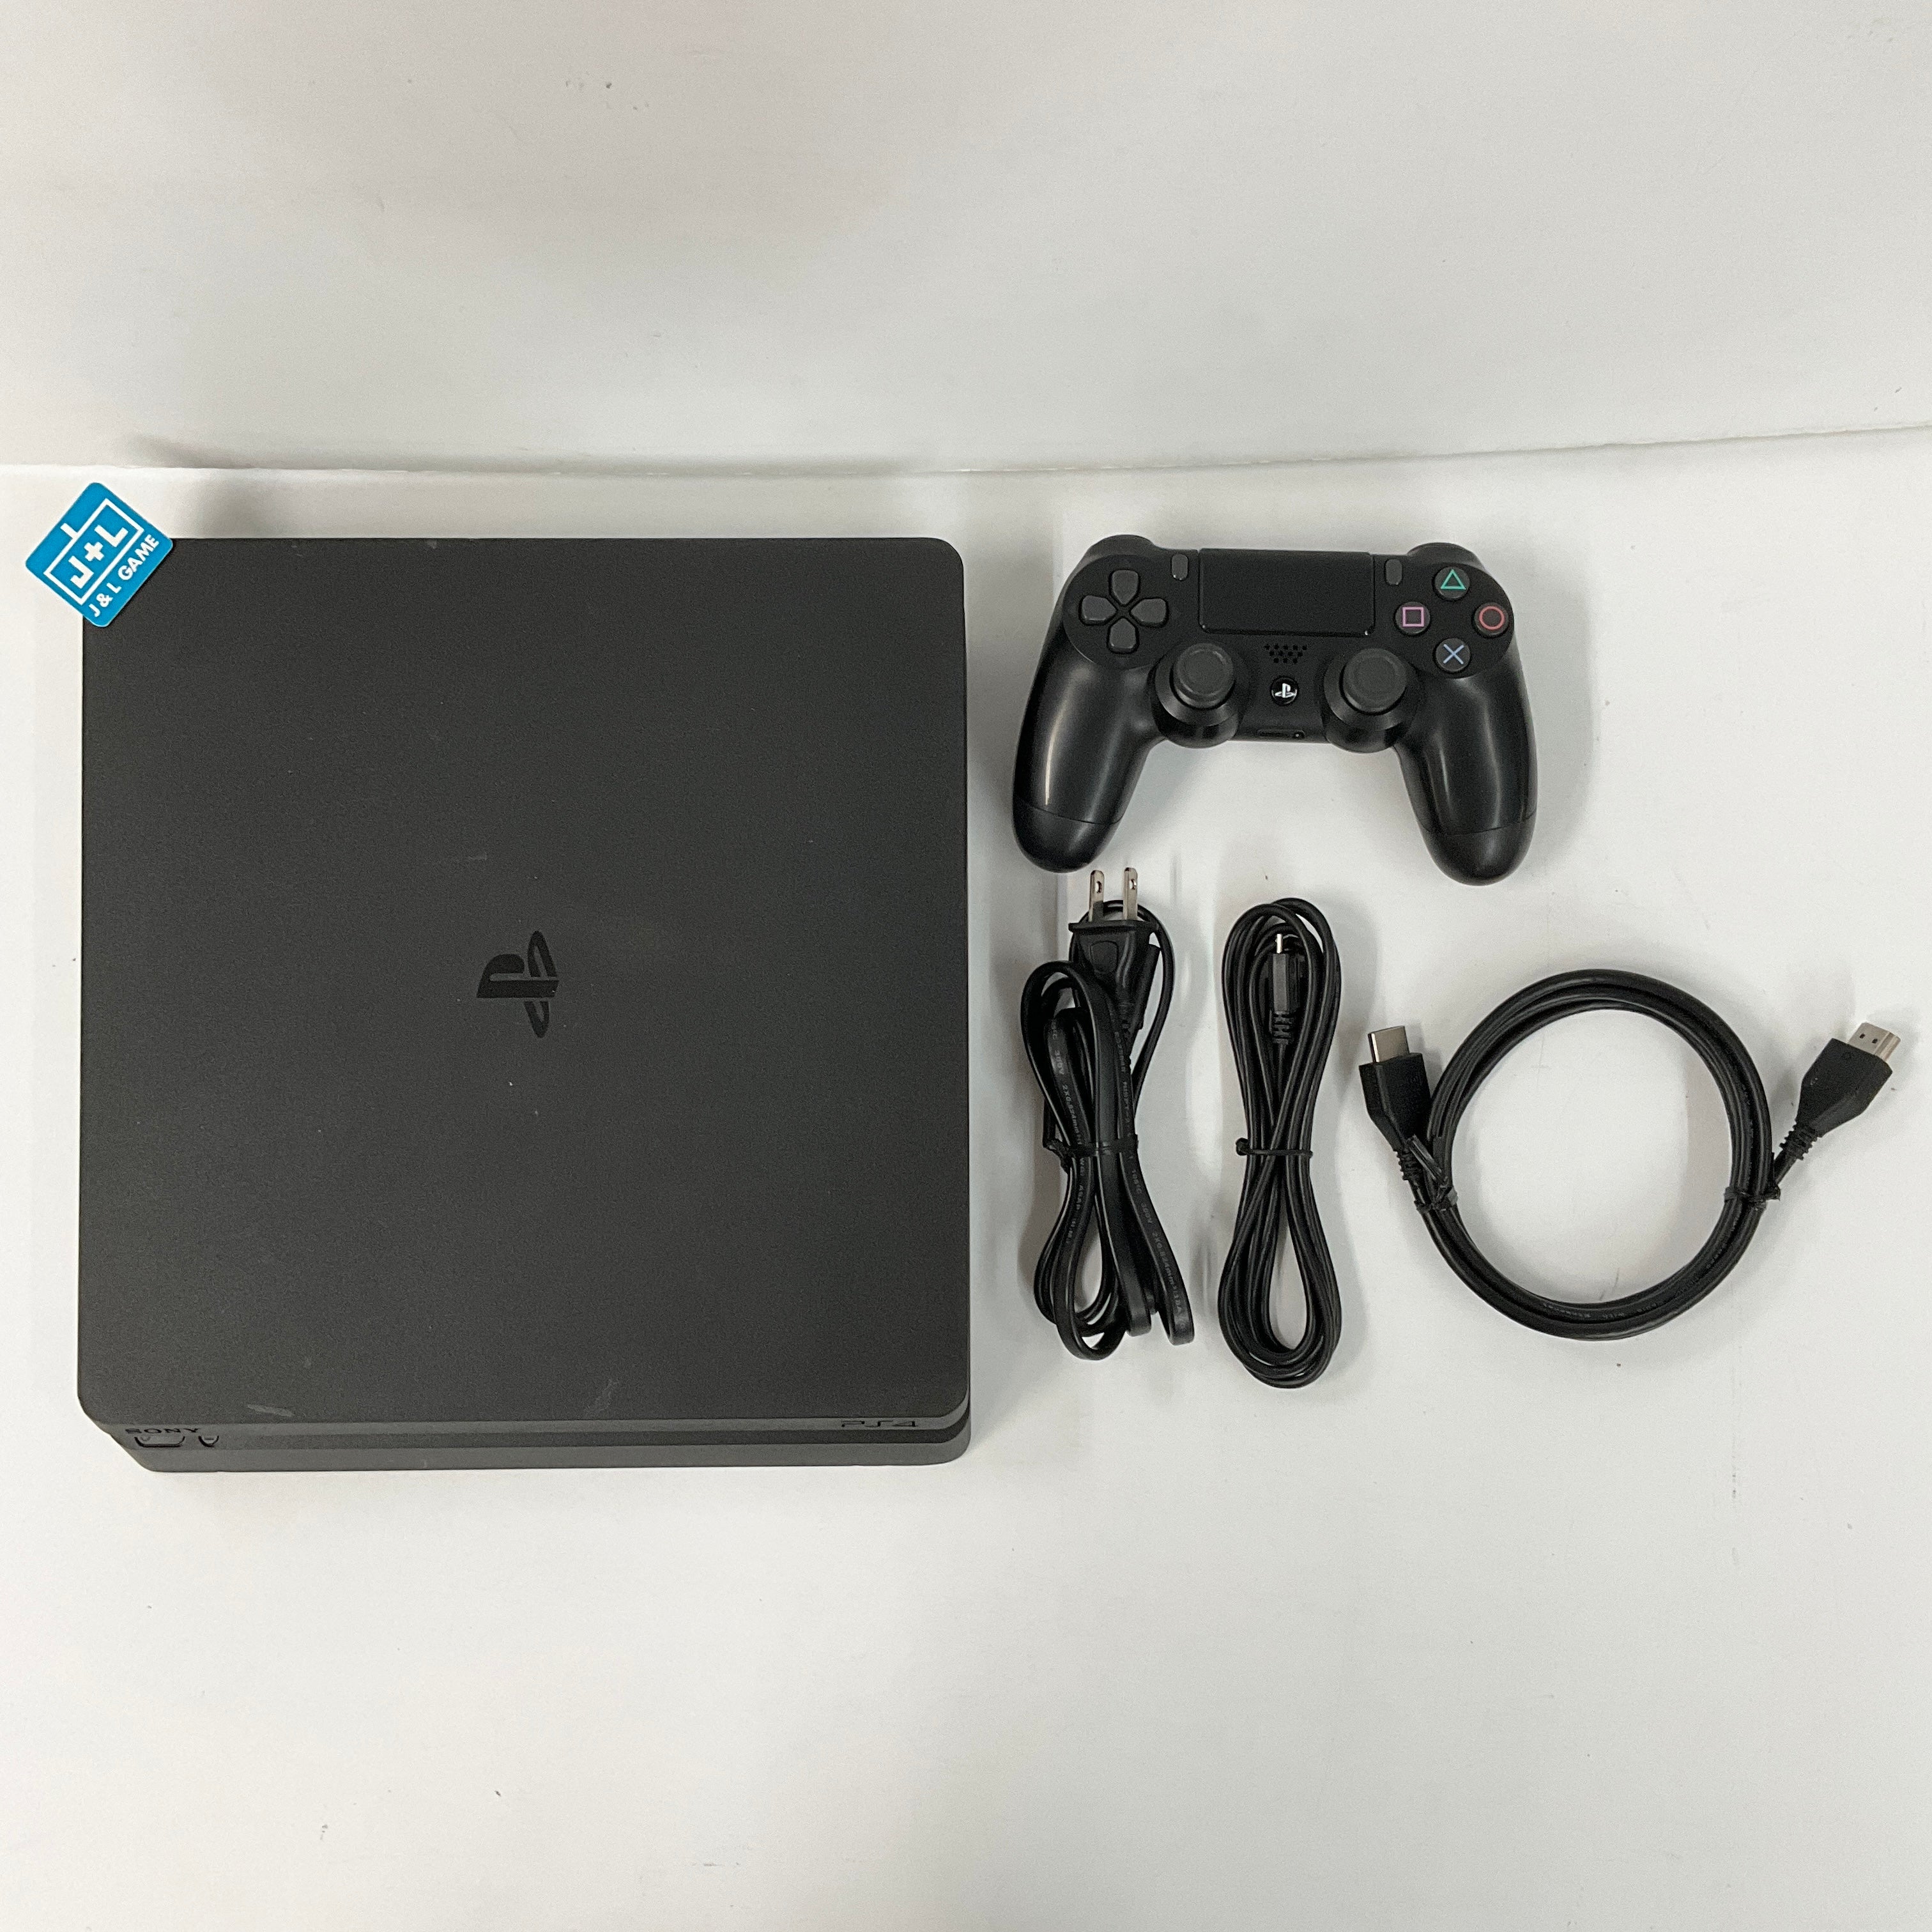 SONY PlayStation 4 Slim 1TB Console  - (PS4) PlayStation 4 [Pre-Owned] Consoles Sony   